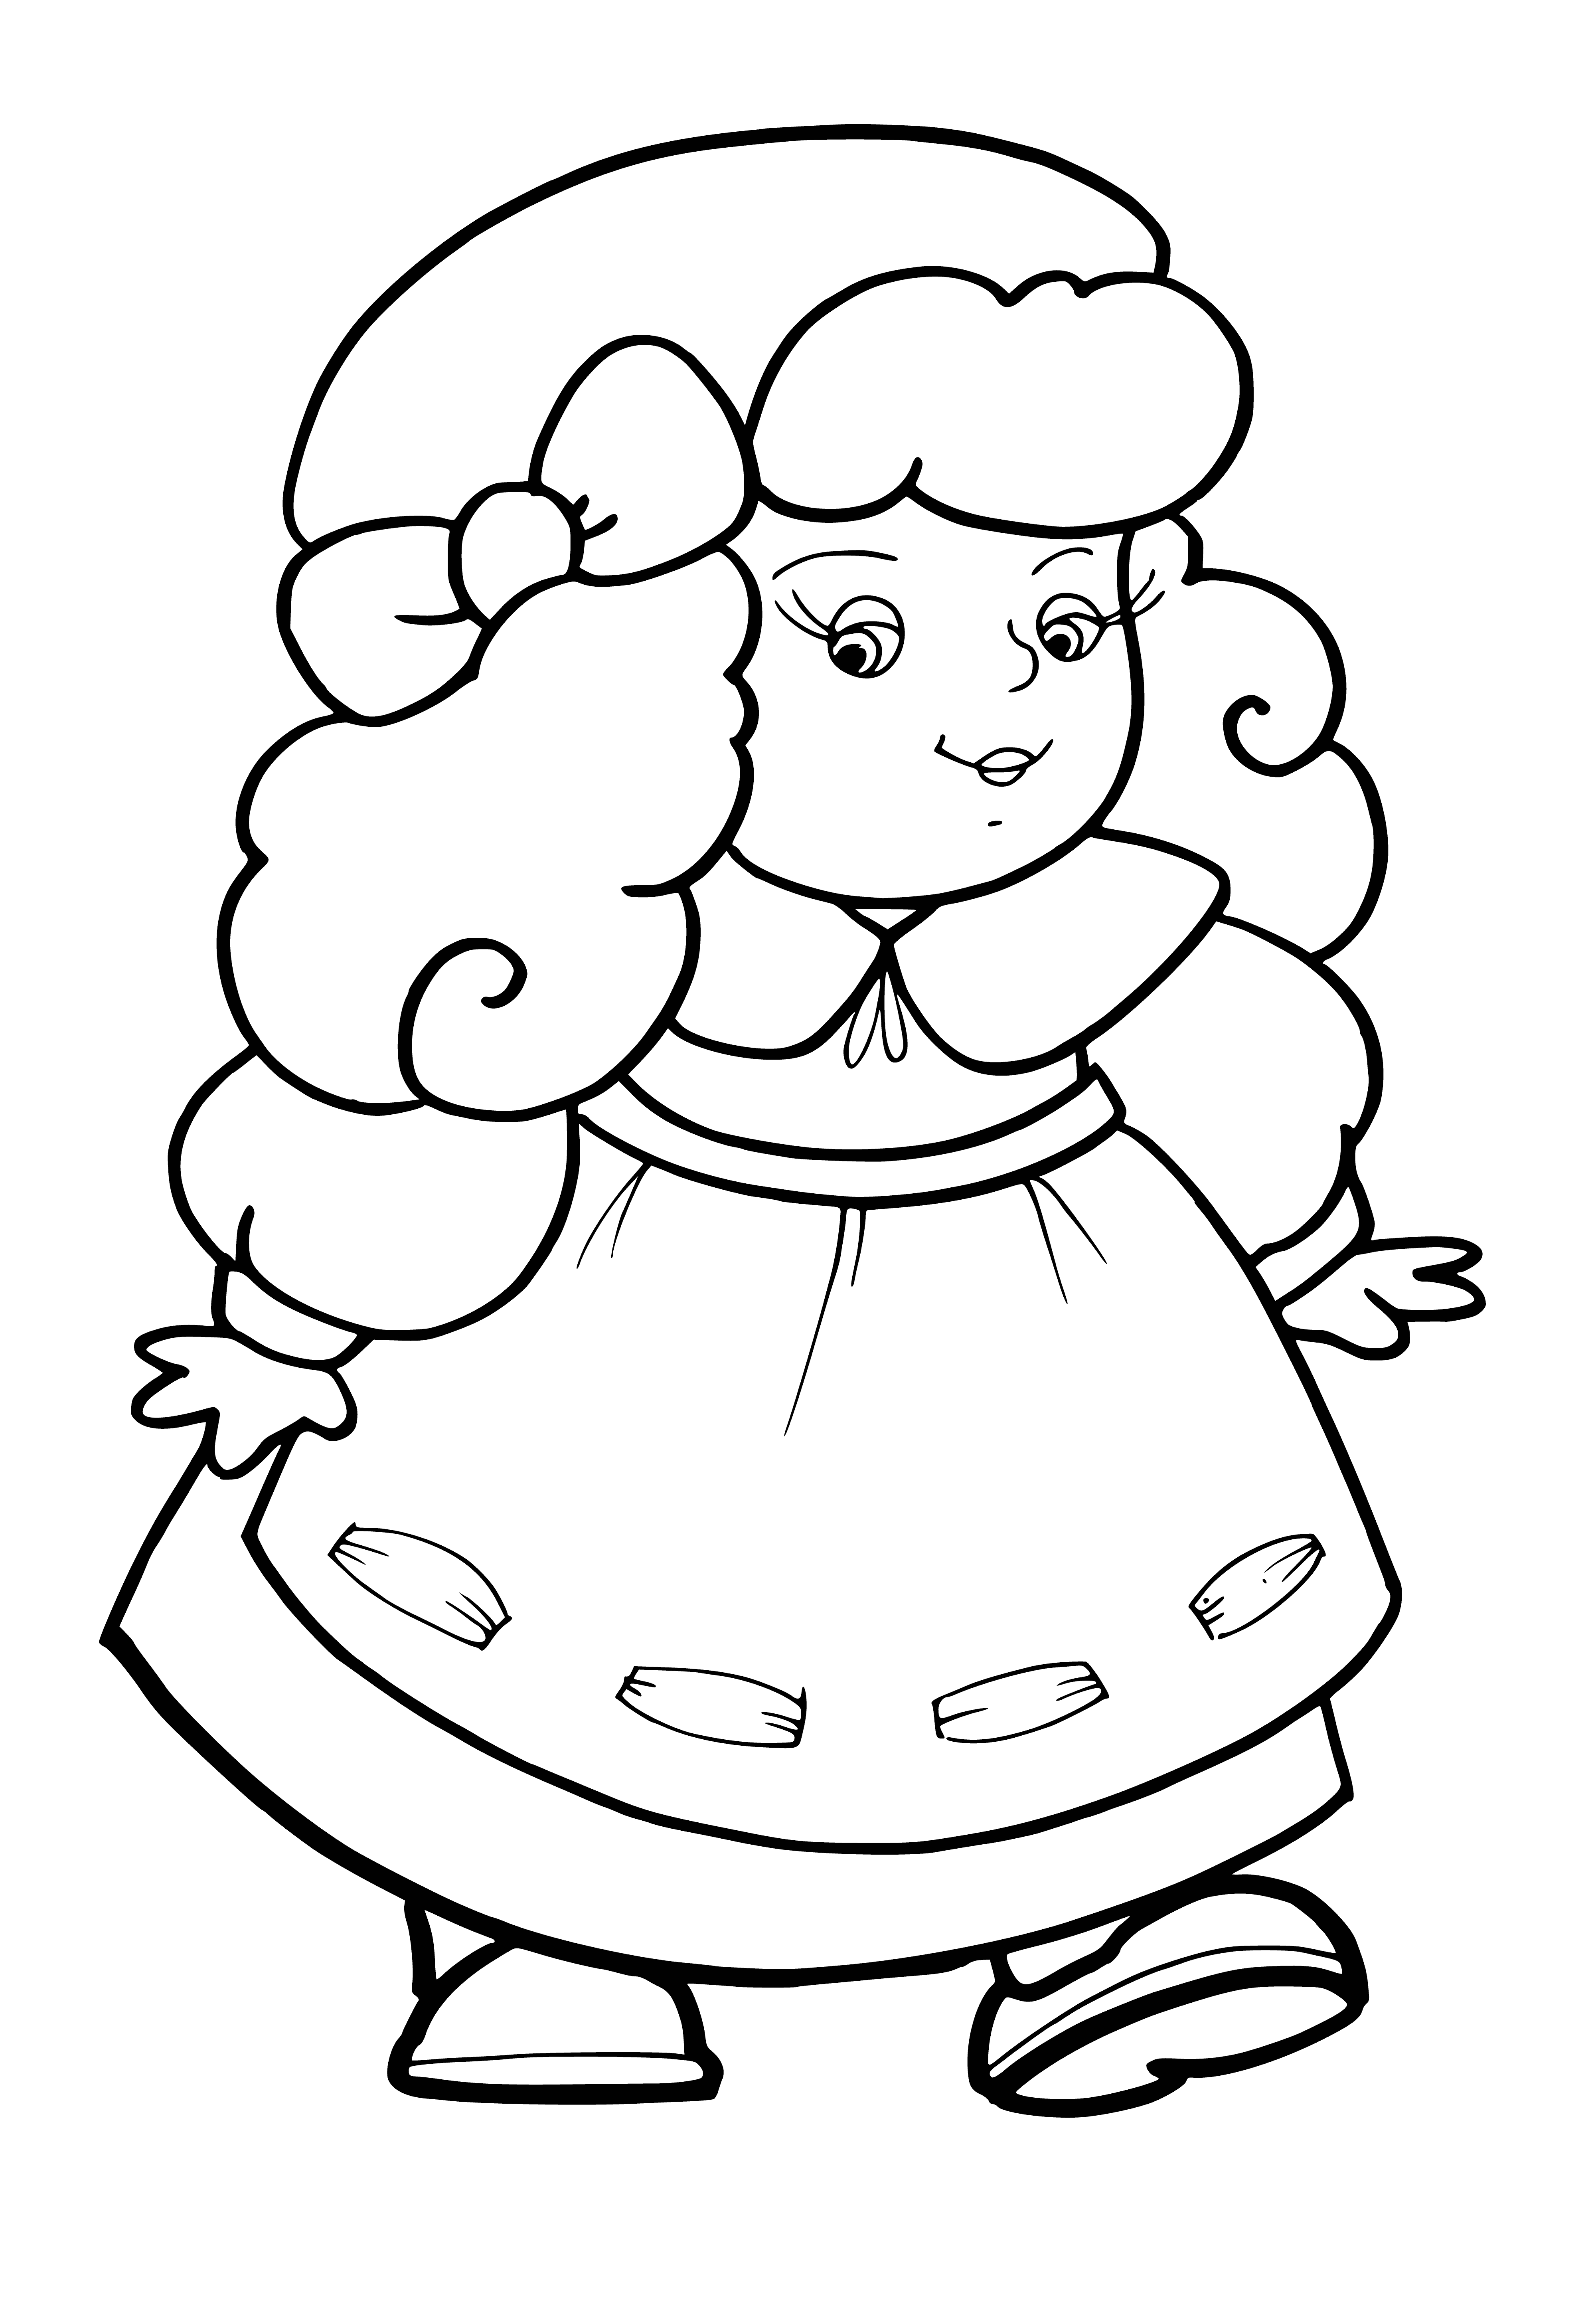 coloring page: A toy doll in a white dress with blue polka dots and a blue scarf holds a brown teddy bear. #doll #teddybear #coloringpage